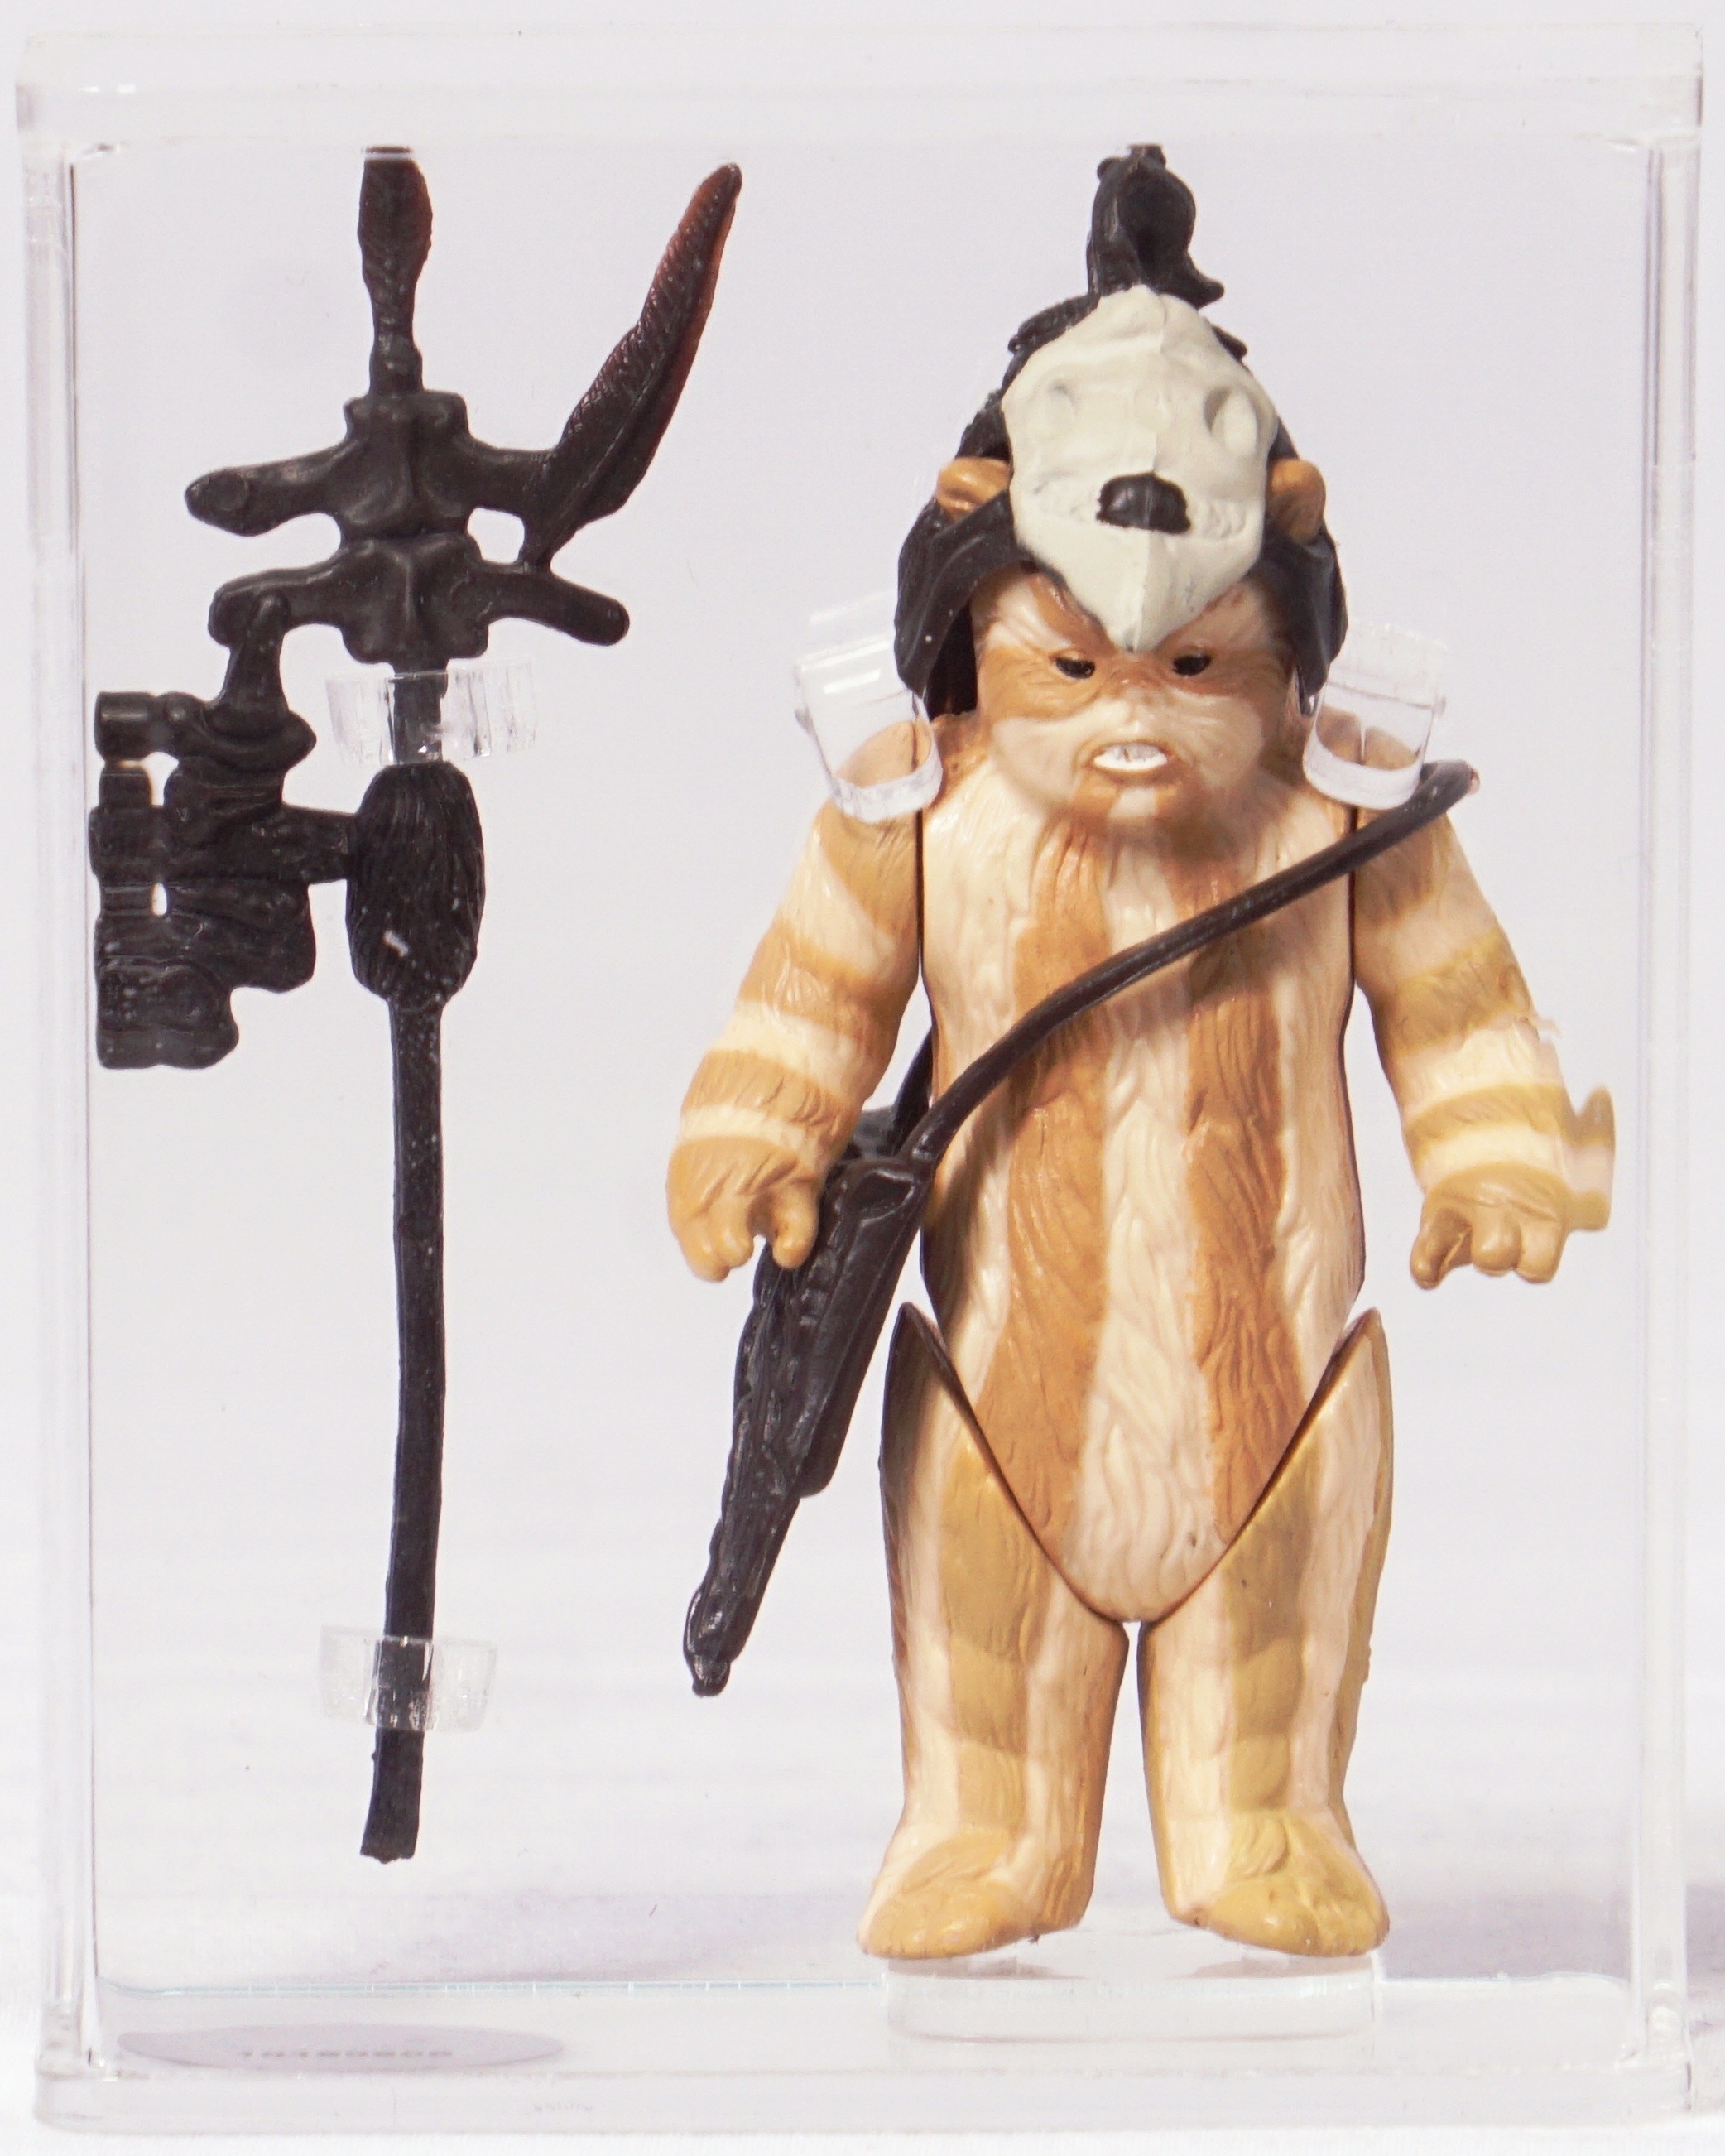 Kenner Star Wars action figures - Wikipedia